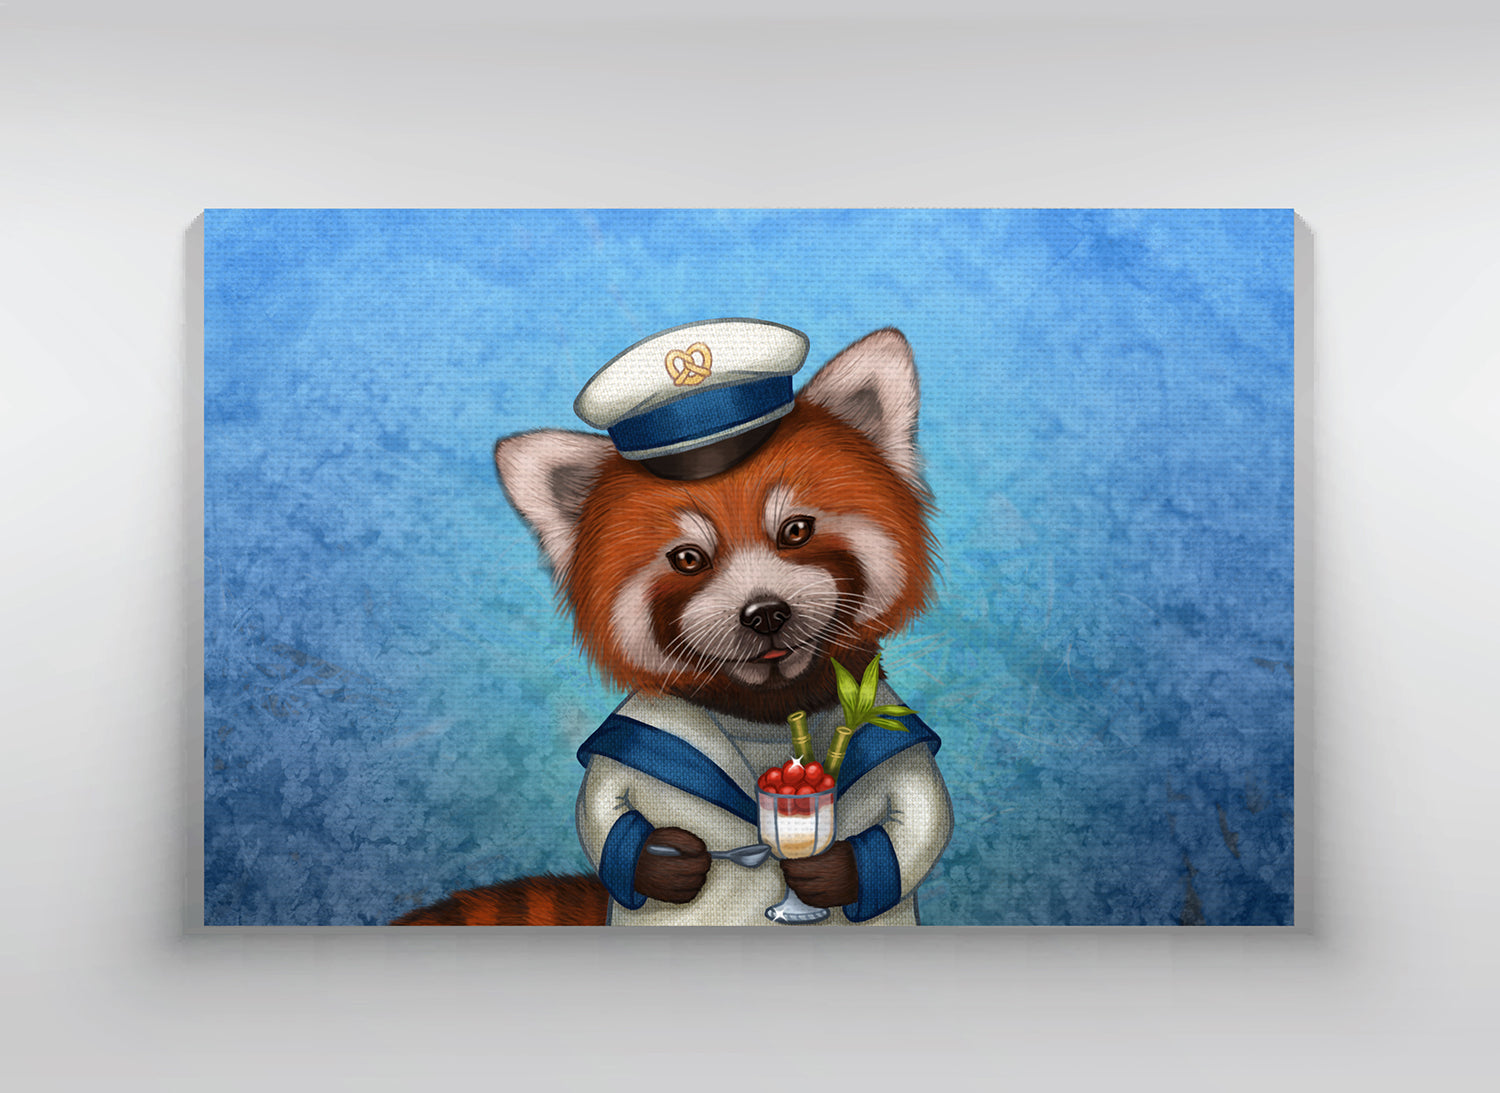 Canvas "Life is uncertain so eat your dessert first" (Red panda)